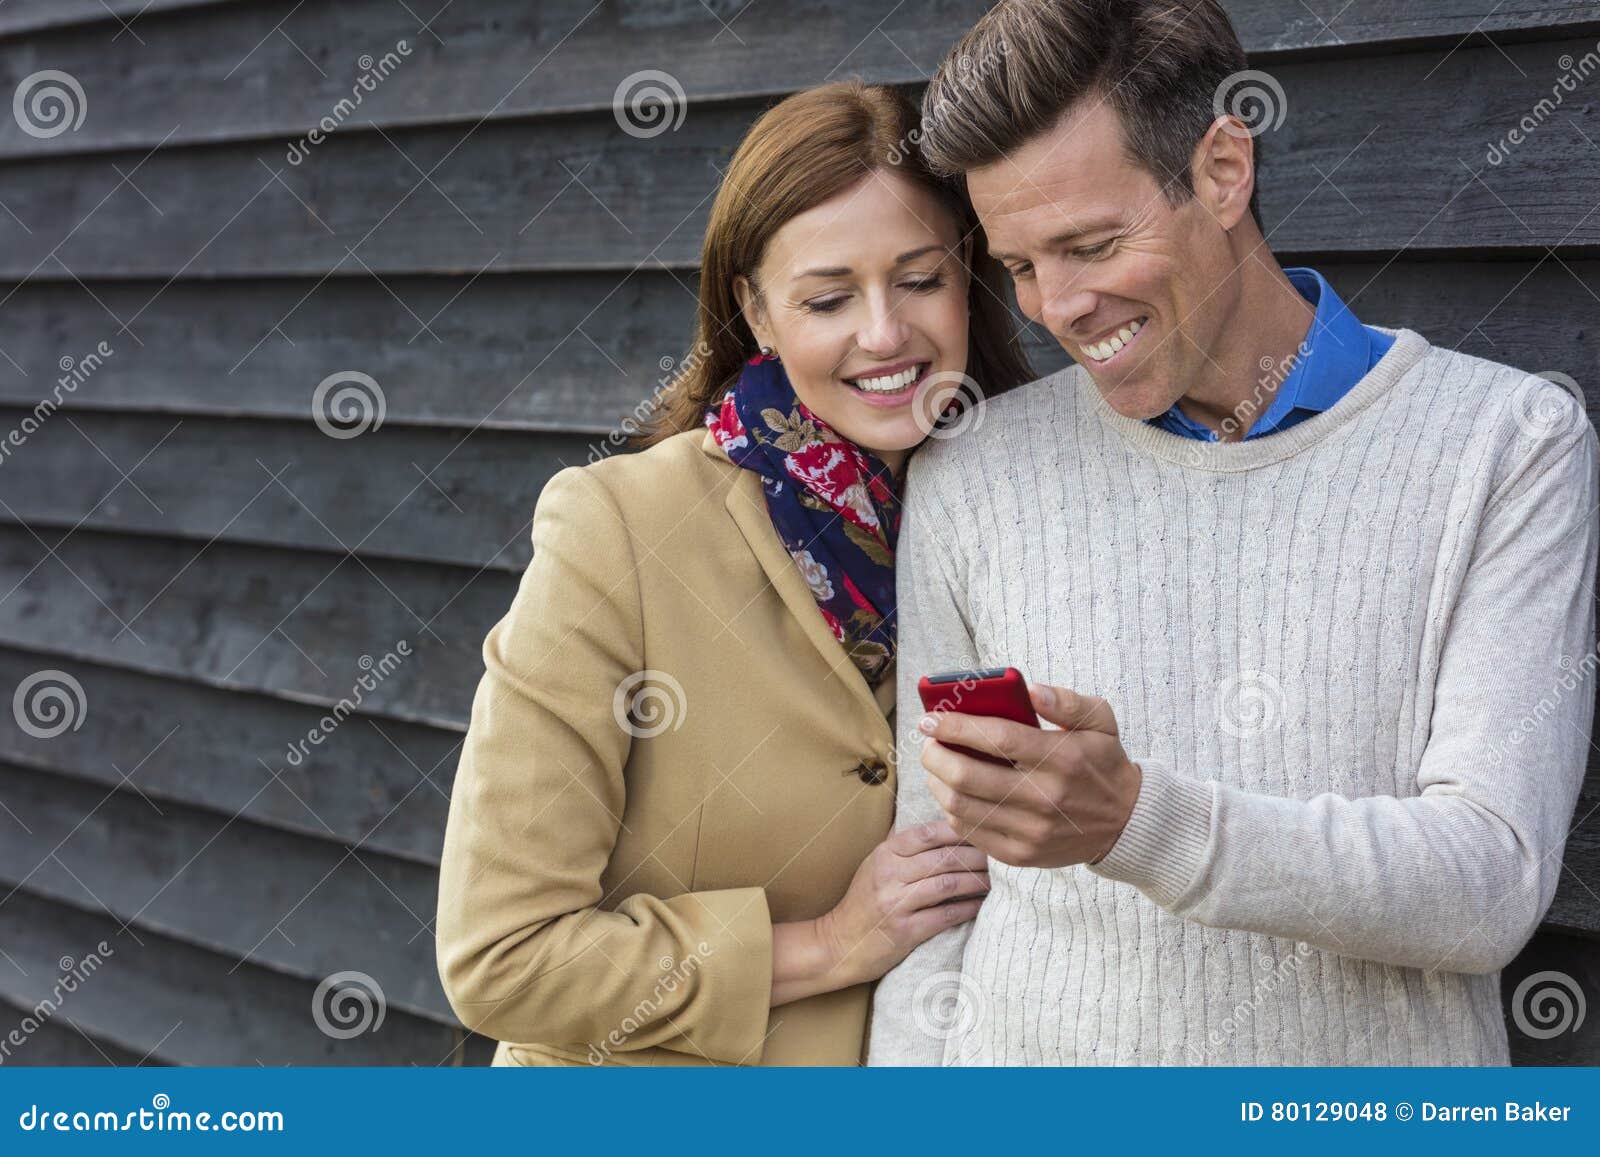 https://thumbs.dreamstime.com/z/happy-middle-aged-man-woman-couple-using-cell-mobile-phone-attractive-successful-men-women-together-outside-80129048.jpg